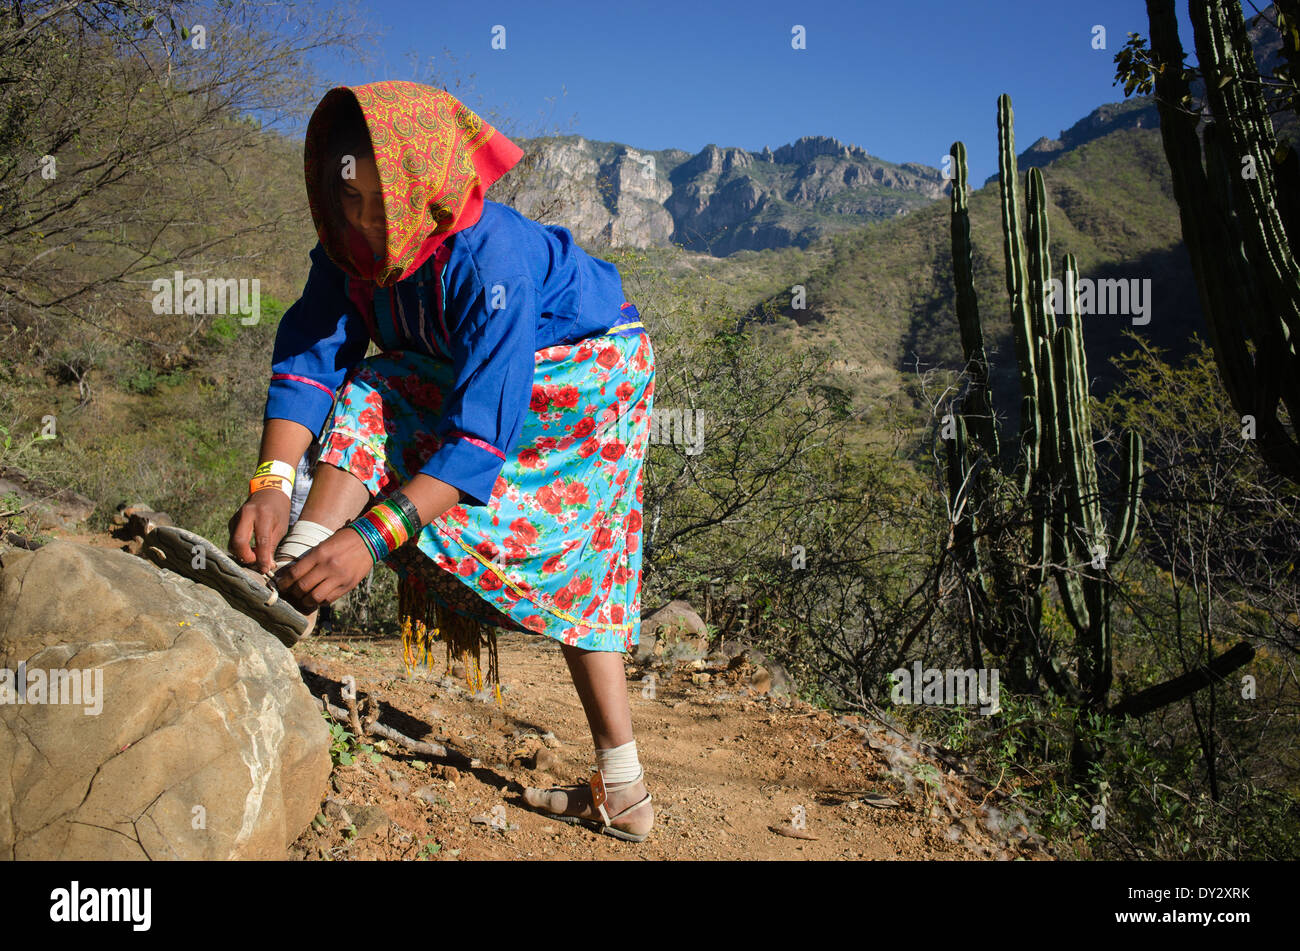 Young girl sits by her simple adobe and log home in the Tarahumara village  of San Alonso in the Copper Canyon area of Mexico Stock Photo - Alamy